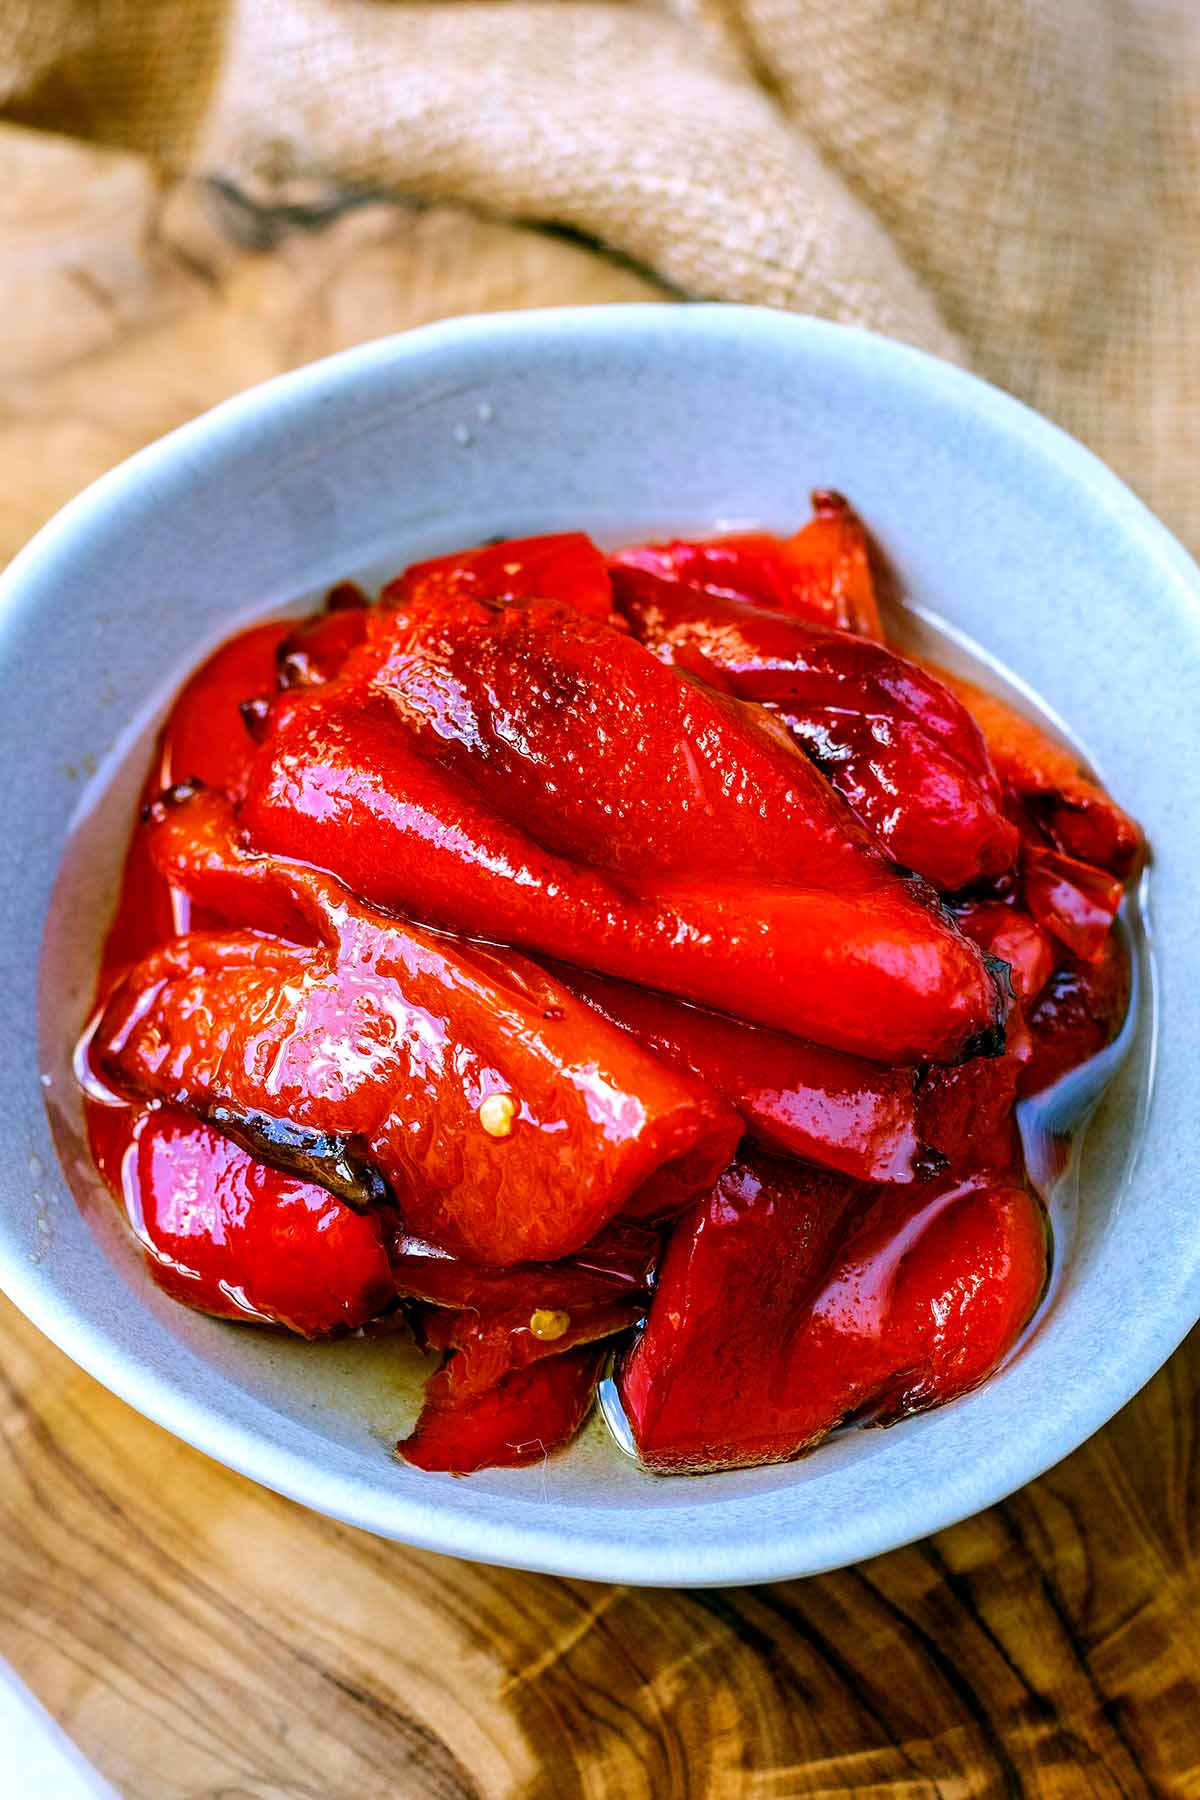 A bowl of roasted red peppers in oil.